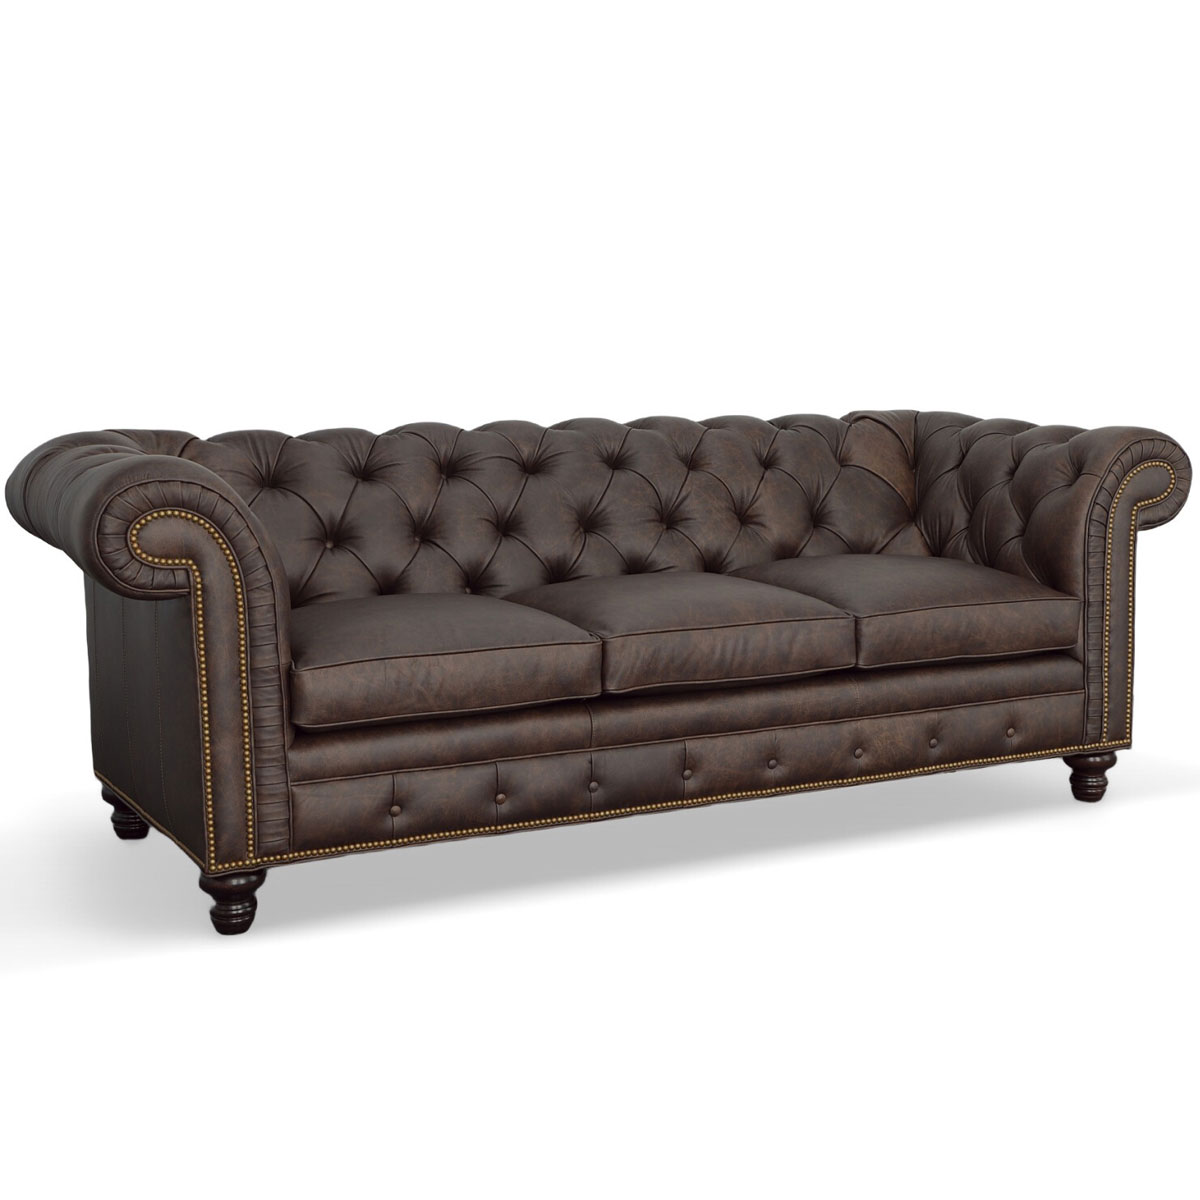 619 Windsor Sofa by CC Leather